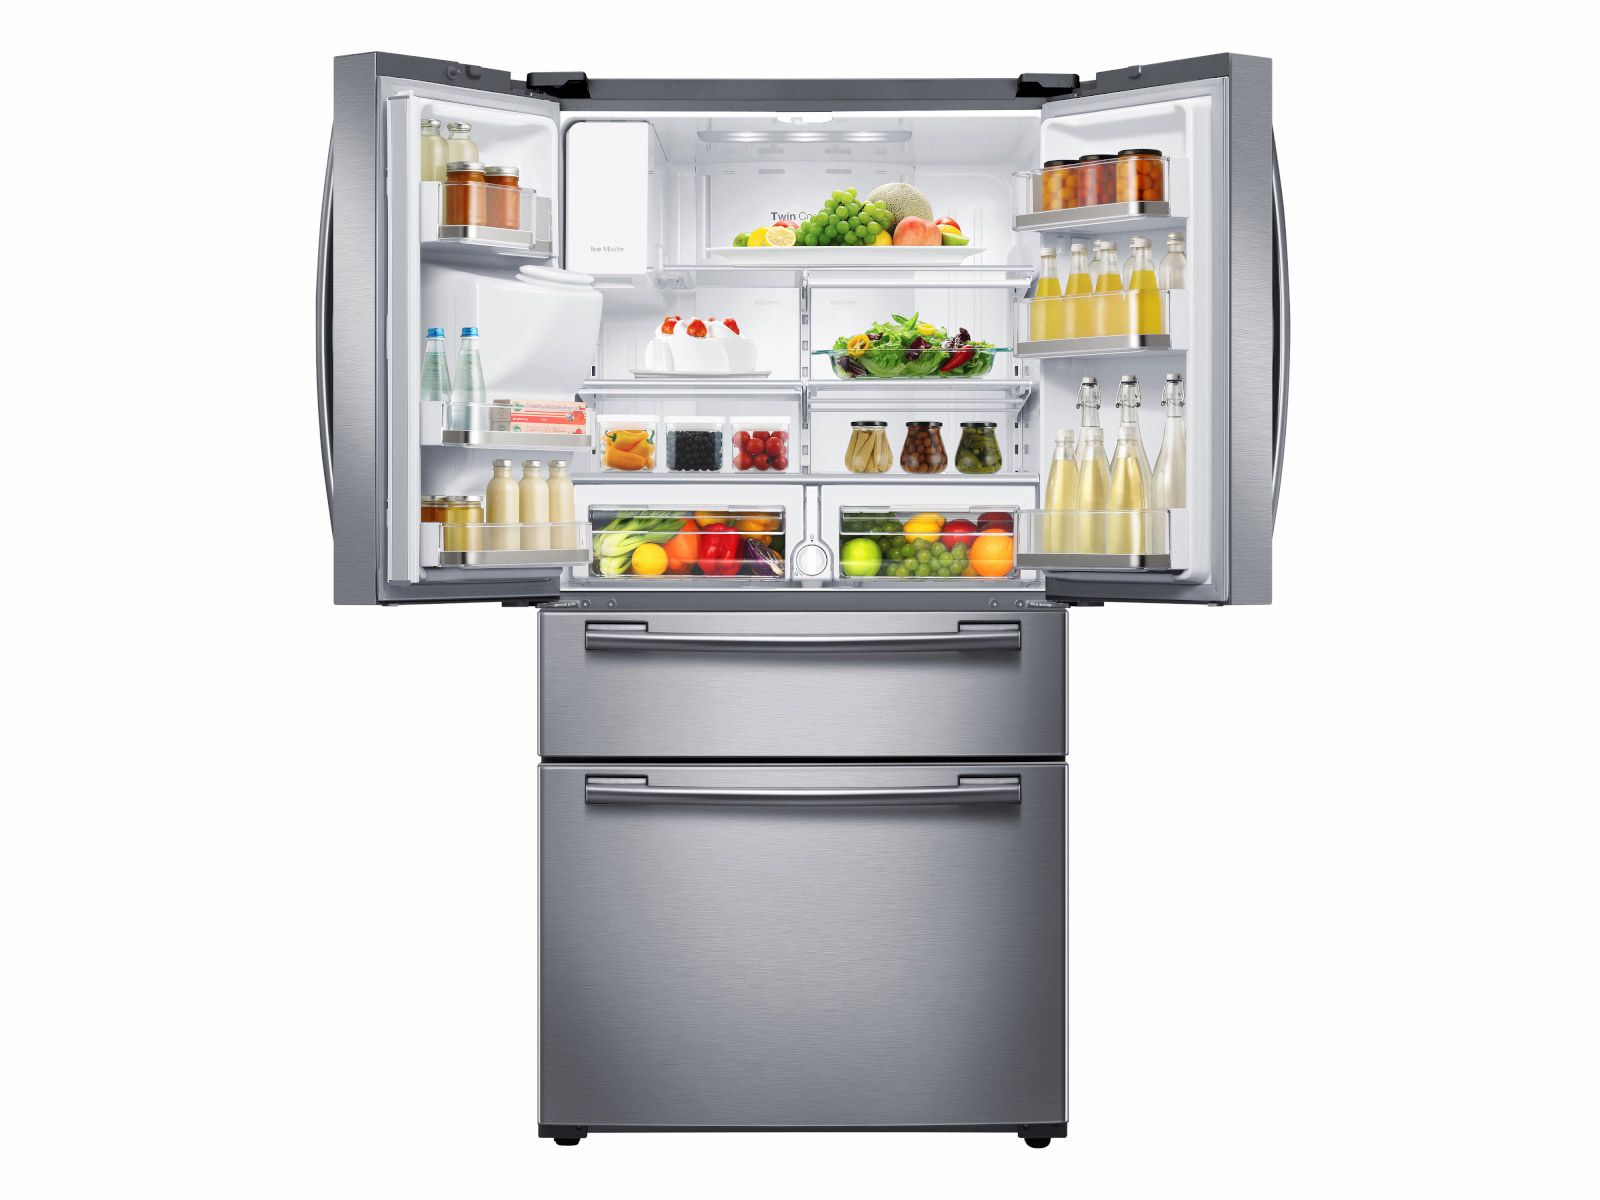 https://image-us.samsung.com/SamsungUS/home/home-appliances/refrigerators/french-doors/pdp/rf25hmedbsr/102417-new/02_Refrigerator_French-Door_RF25HMEDBSR_Top-Doors_Open_with_Food_Silver.jpg?$product-details-jpg$